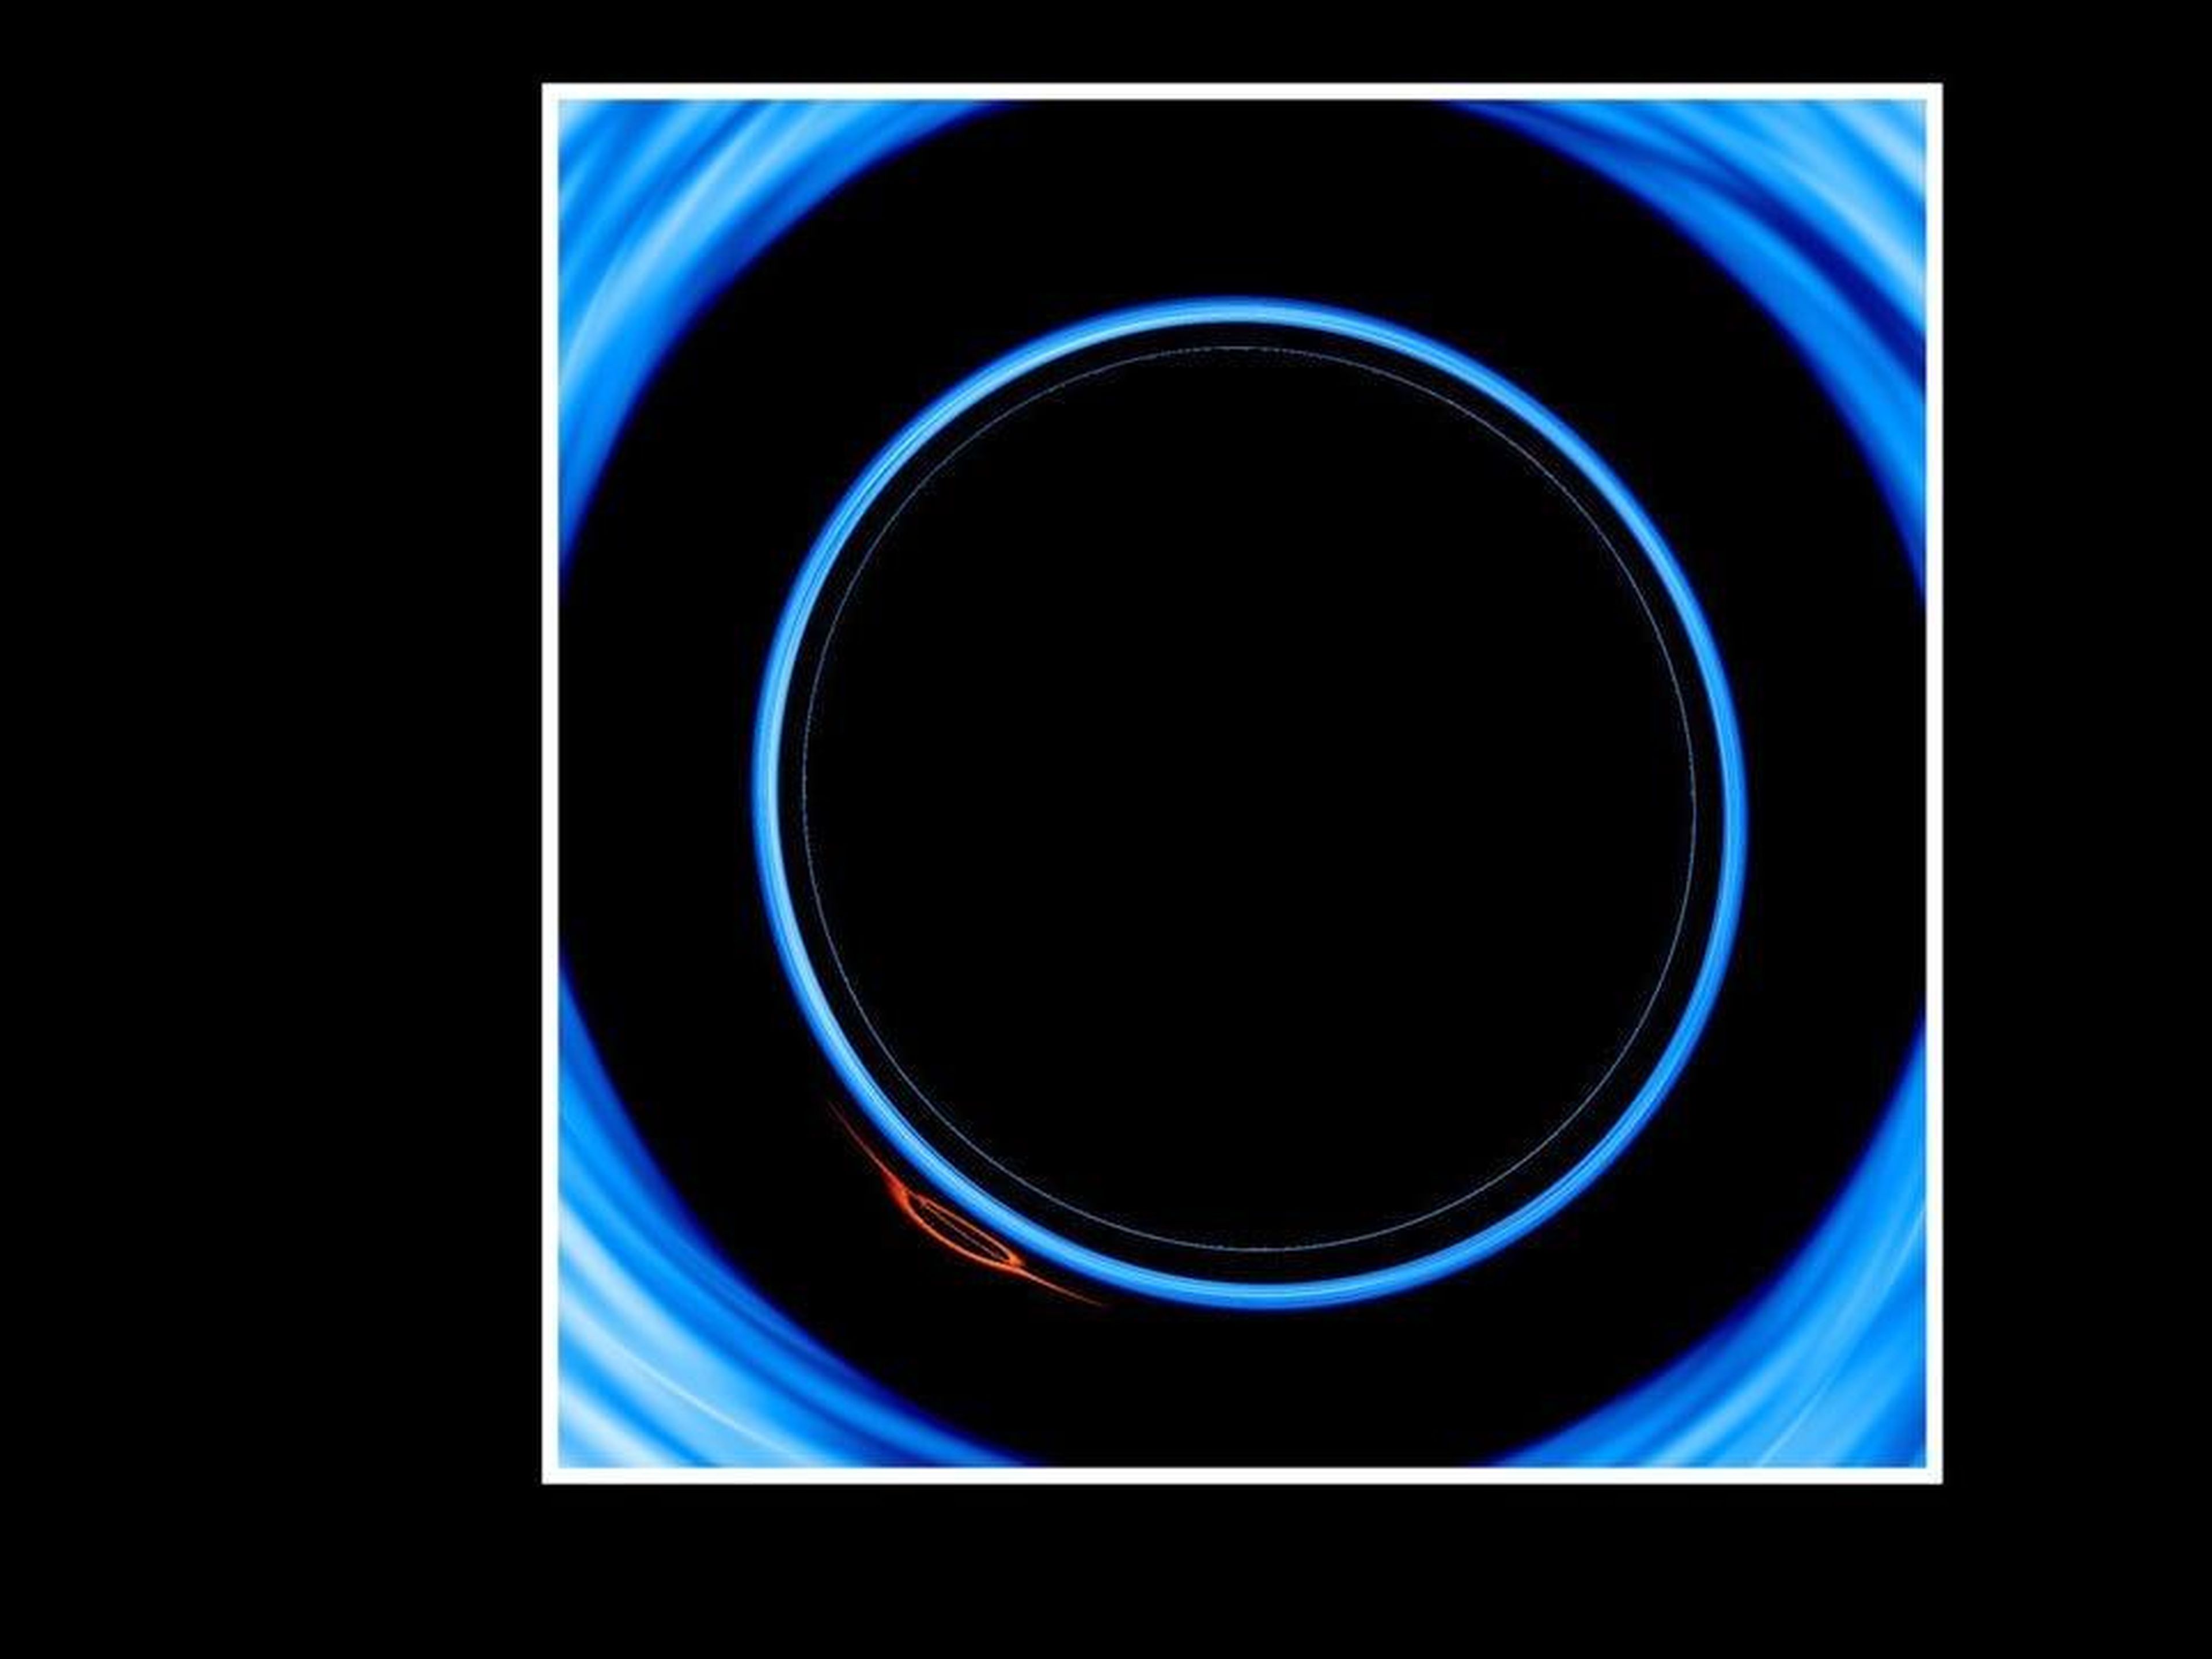 An animation of a black hole as viewed from above or below.